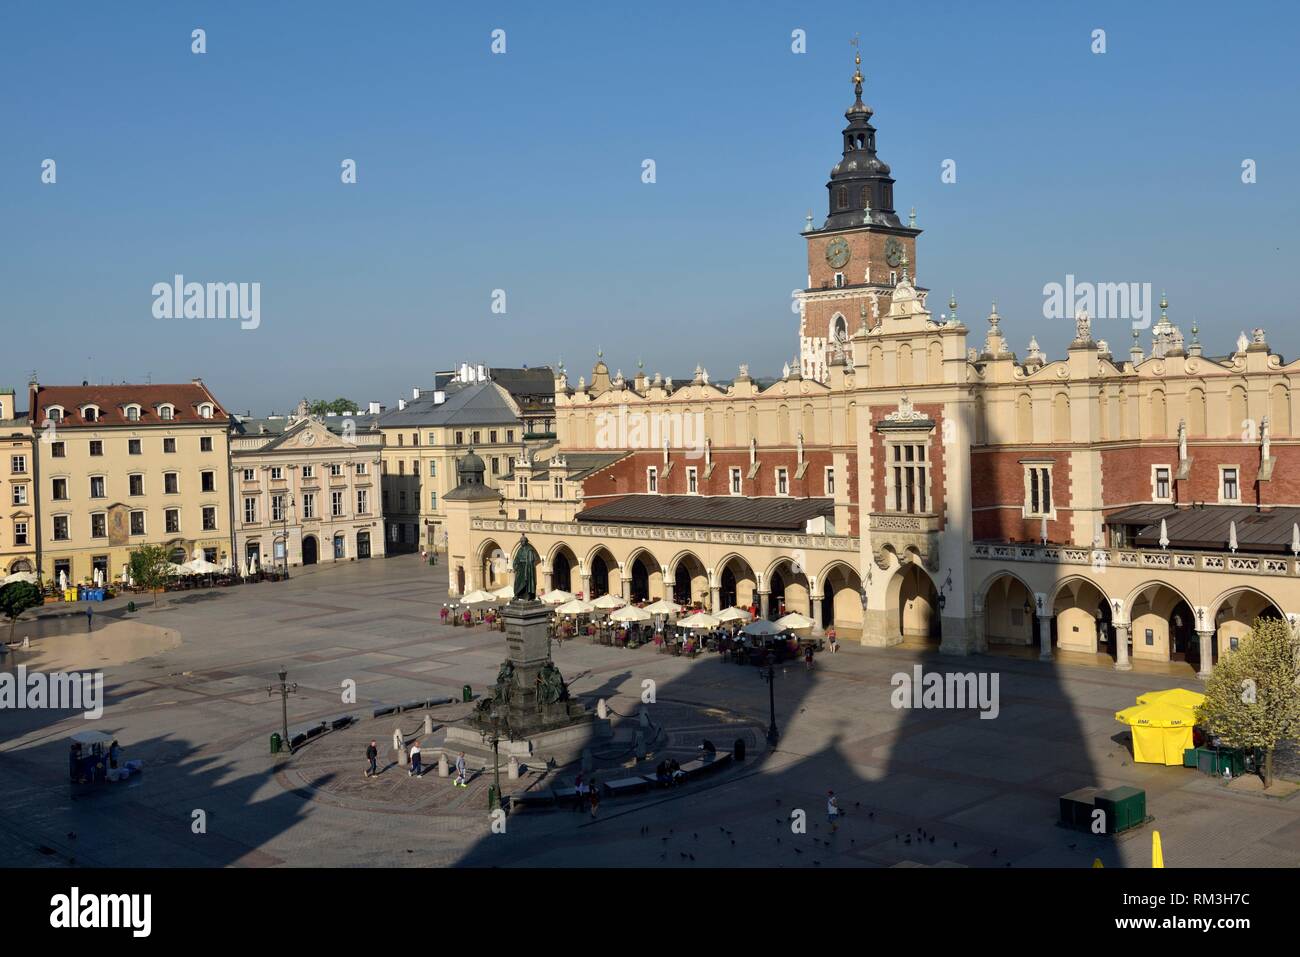 Adam Mickiewicz Monument, the Cloth Hall (Sukiennice) and Town Hall Tower on Rynek Glowny, the main square of the Old Town of Krakow, Malopolska Stock Photo